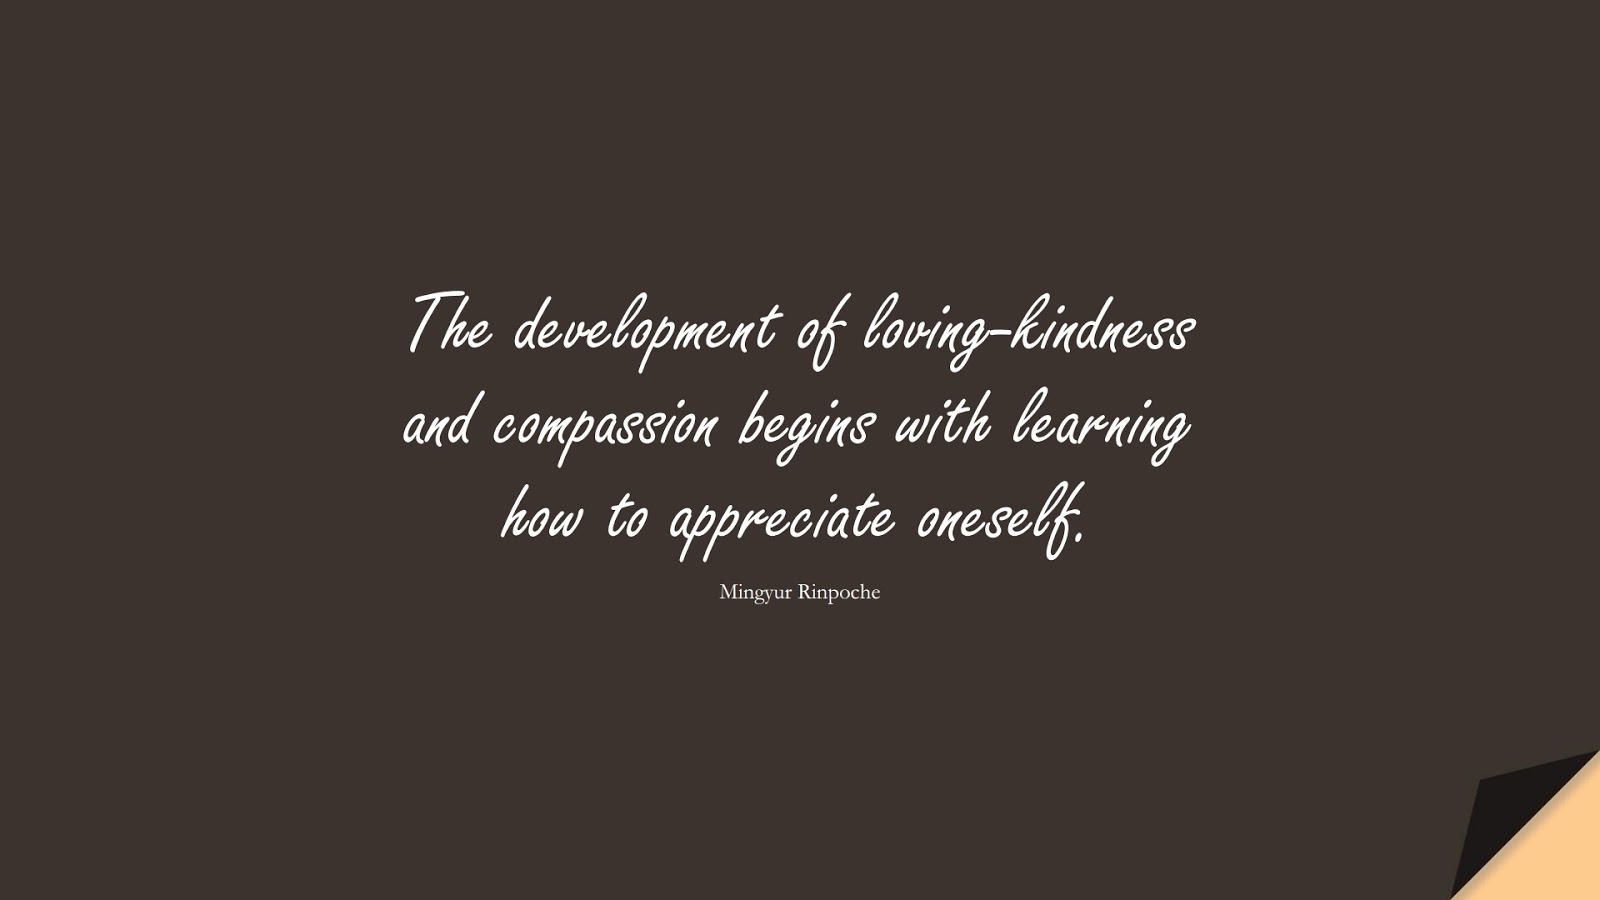 The development of loving-kindness and compassion begins with learning how to appreciate oneself. (Mingyur Rinpoche);  #LoveYourselfQuotes